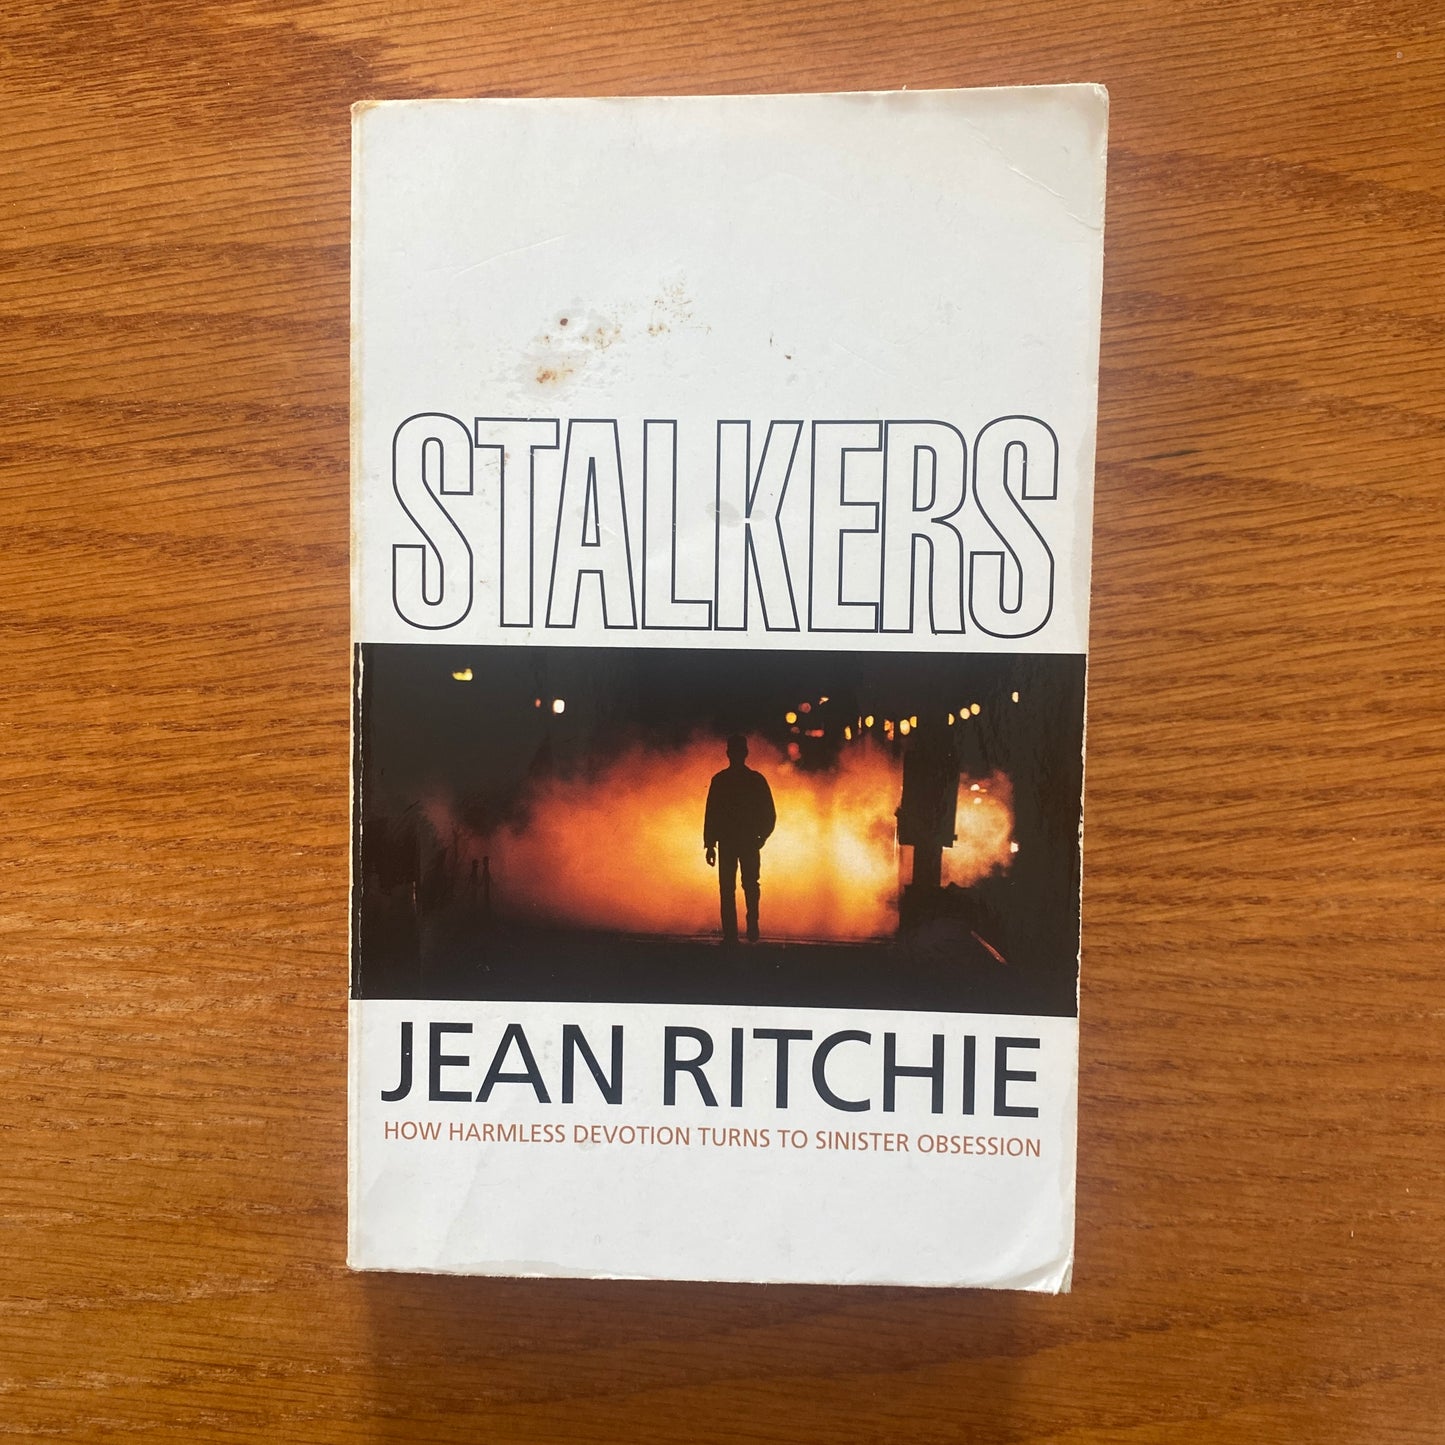 Stalkers: How Harmless Devotion Turns to Sinister Obsession - Jean Ritchie